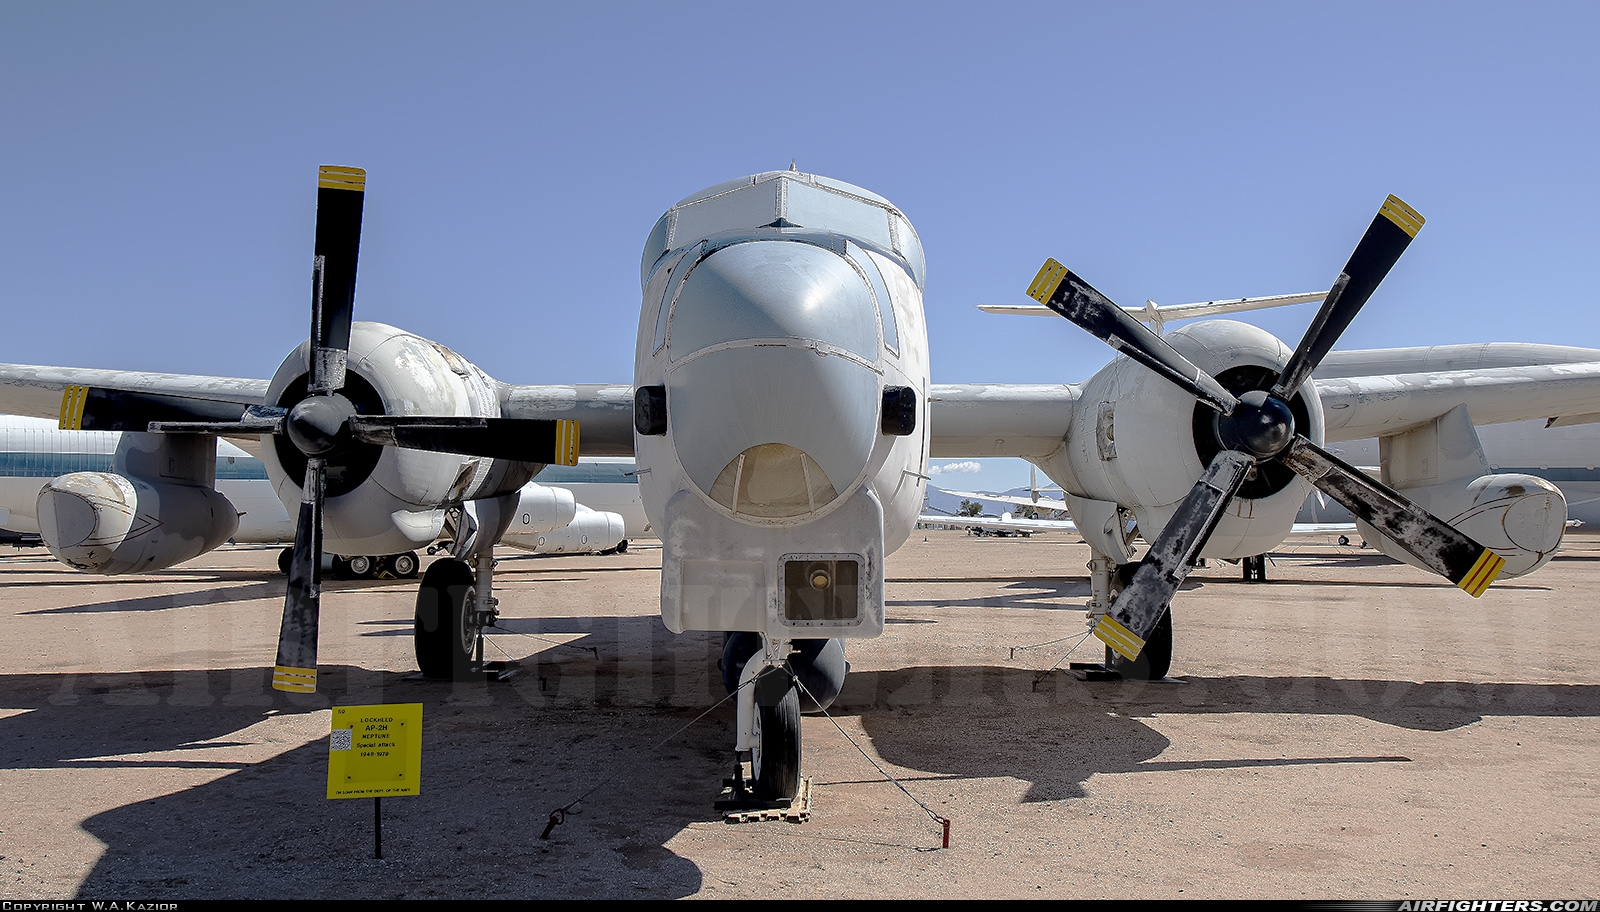 USA - Navy Lockheed AP-2H Neptune 135620 at Tucson - Pima Air and Space Museum, USA